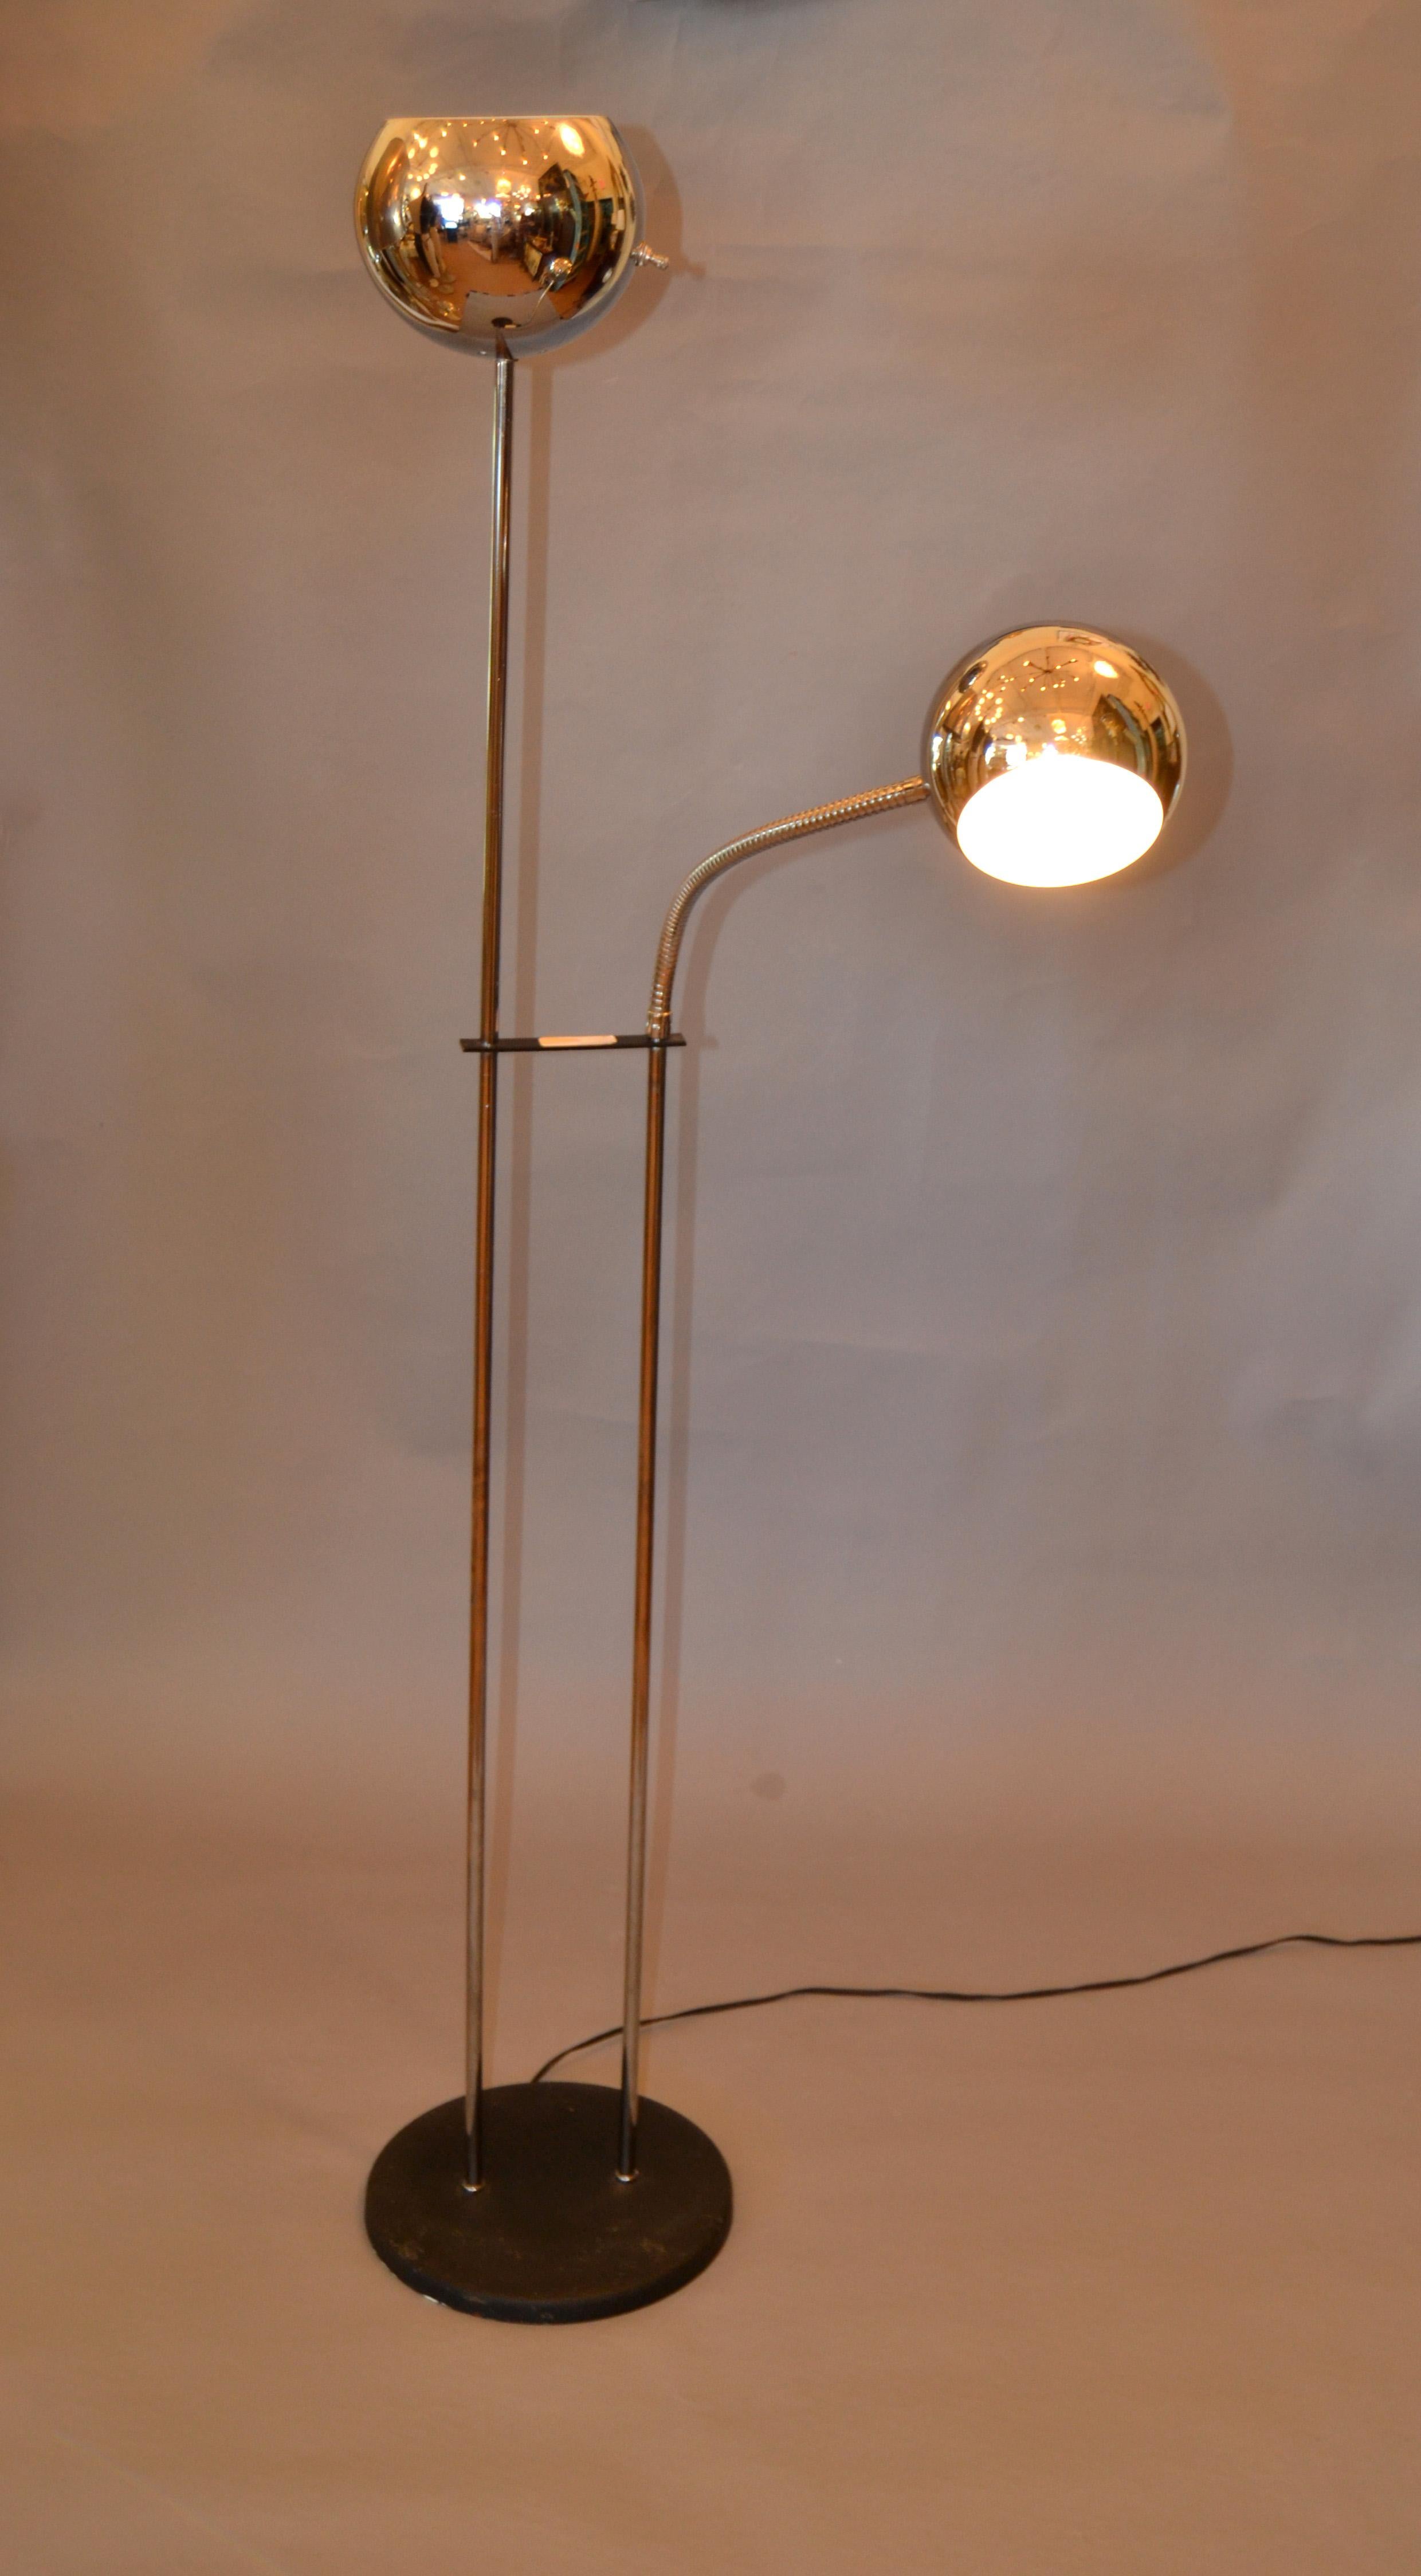 We offer this adjustable floor lamp which has two chrome ball shade lights mounted on a black metal base.
One light is adjustable the other one is stationary.
Both Lights can be operated individually to allow for use as a reading, and or